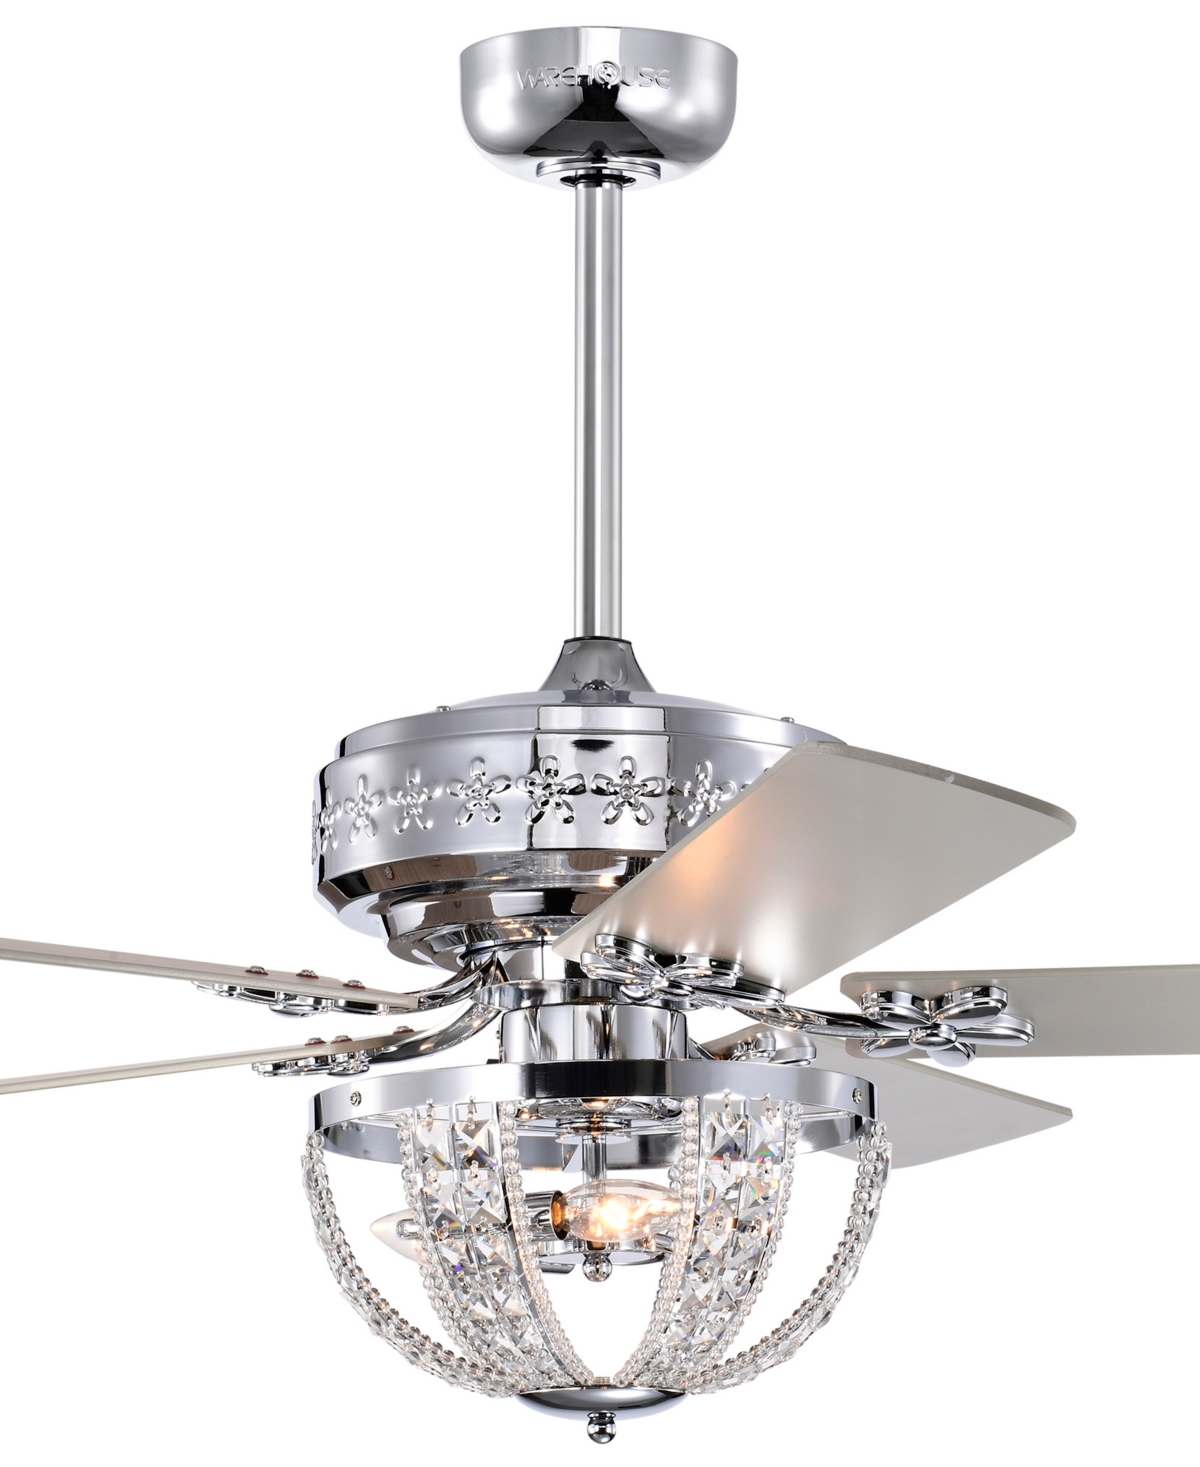 Home Accessories Santana 52" 3-light Indoor Ceiling Fan With Light Kit In Polished Chrome